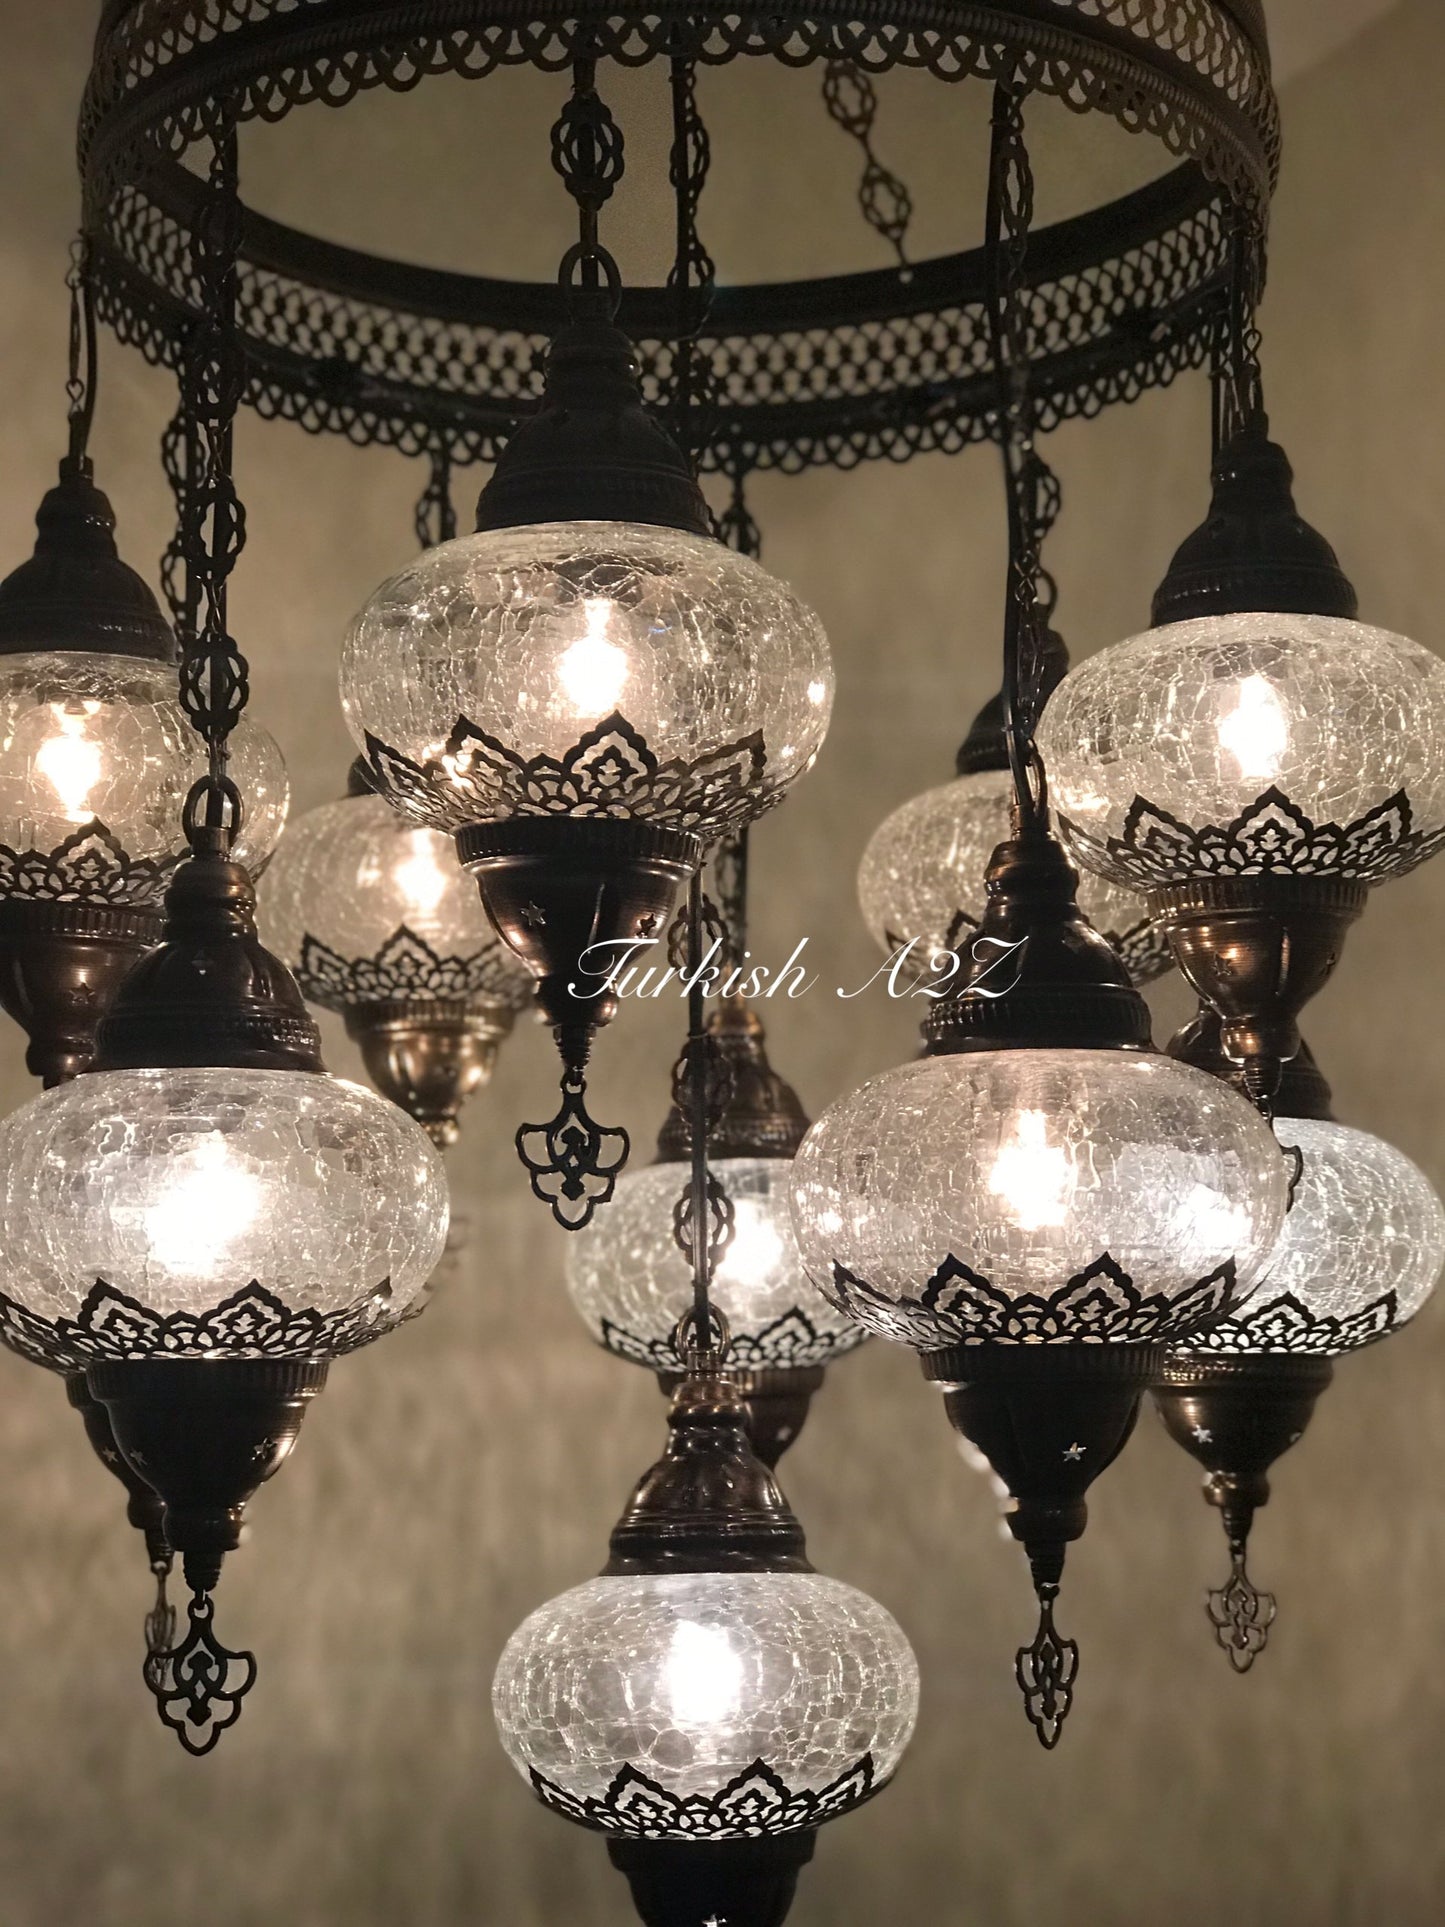 Chandelier with 11 Cracked Globes (Sultan model) , ID:148 - TurkishLights.NET